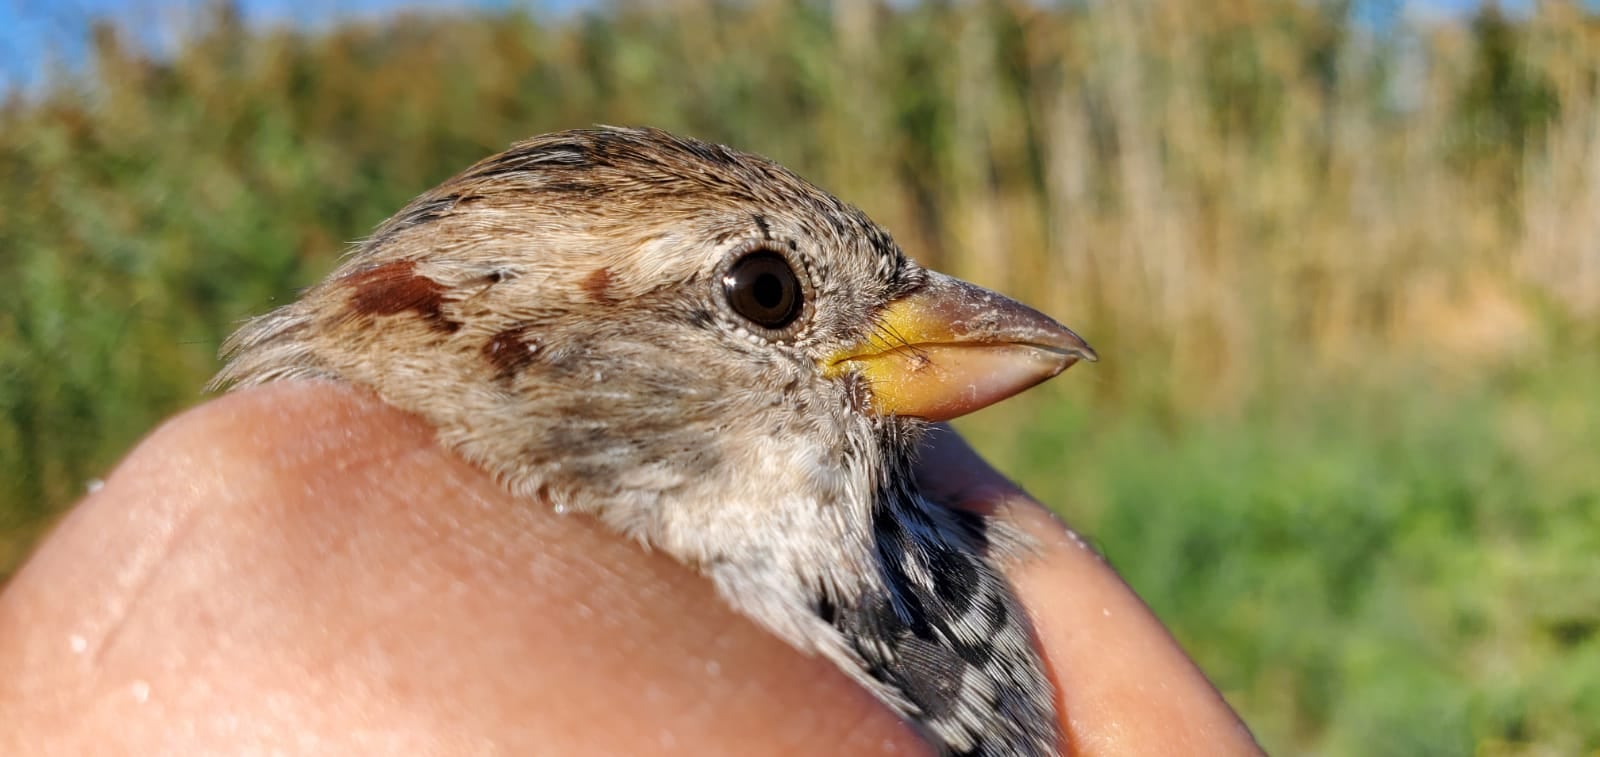 Birdbanding in Prespa National Park, has finished for 2021